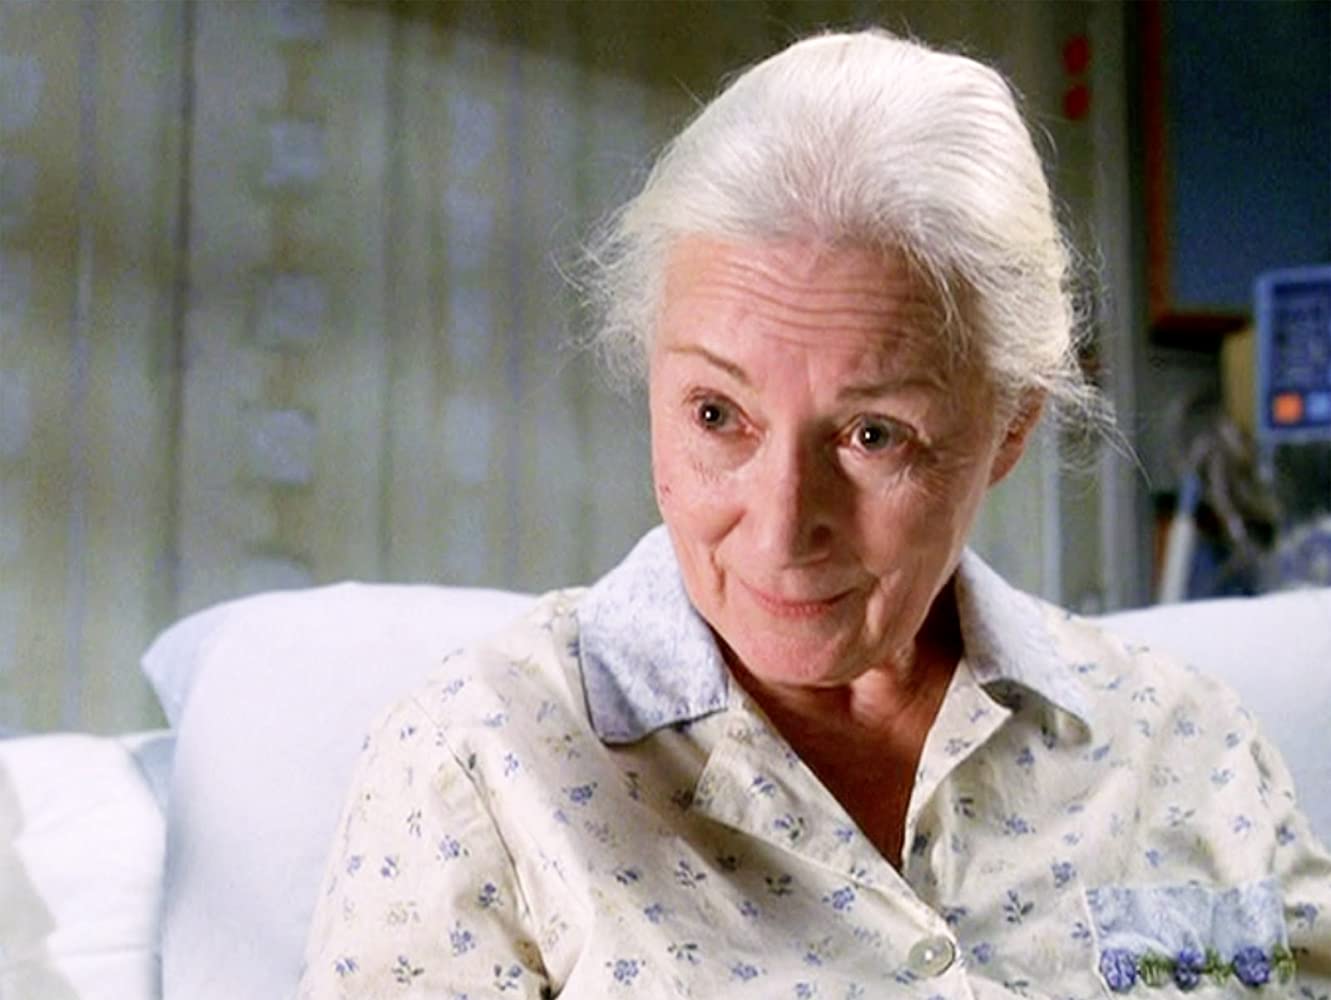 Aunt May sits in a hospital bed, talking.